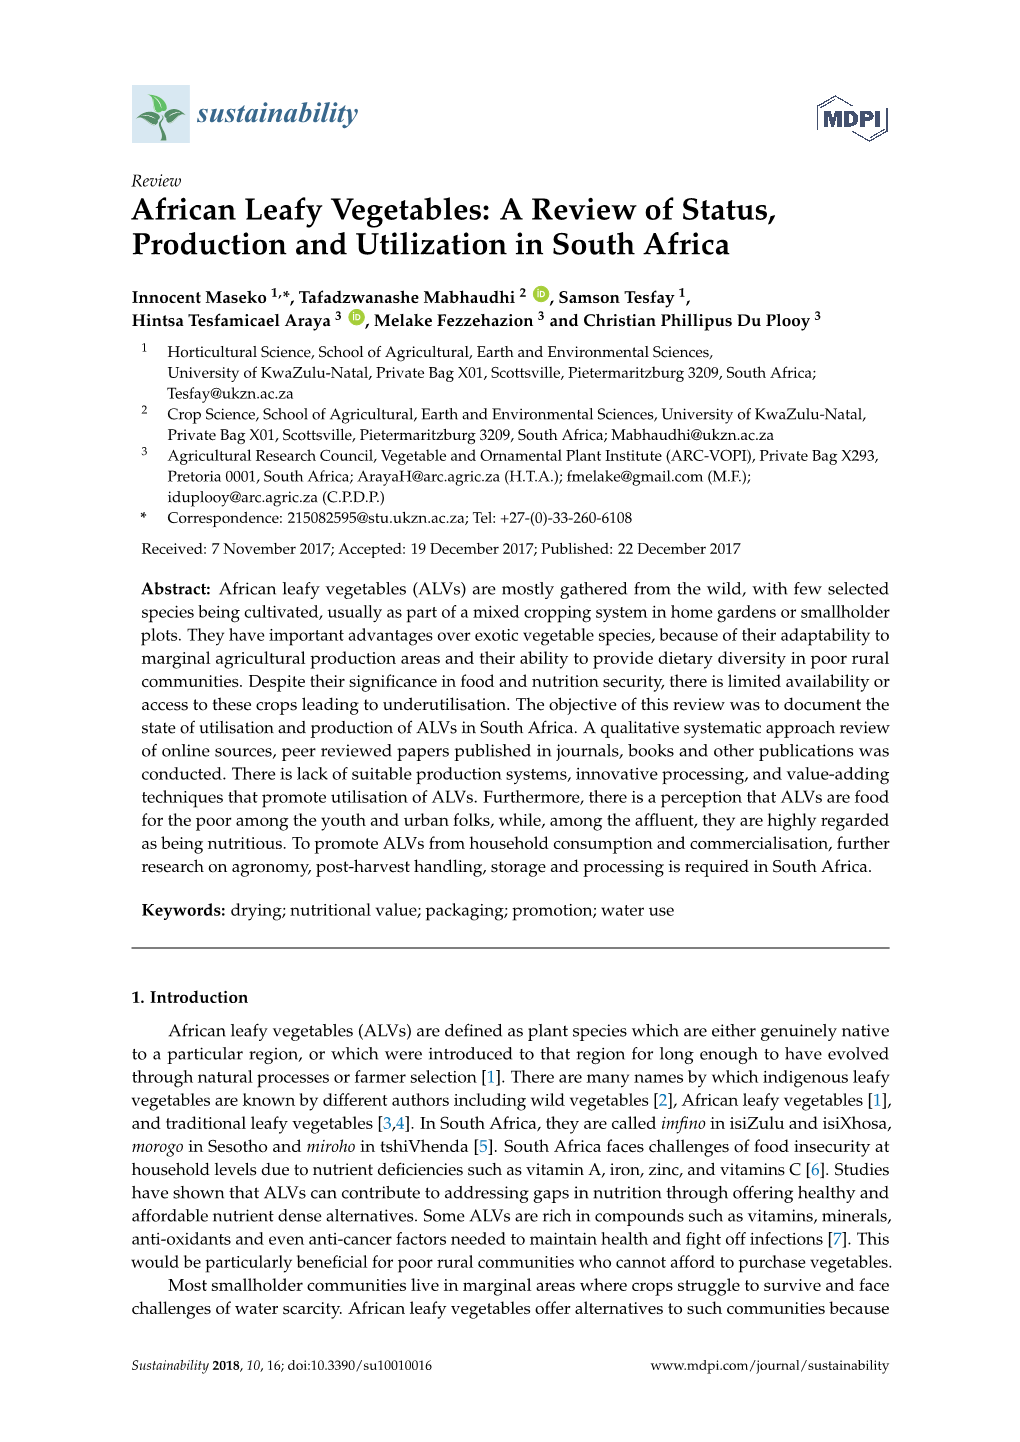 African Leafy Vegetables: a Review of Status, Production and Utilization in South Africa